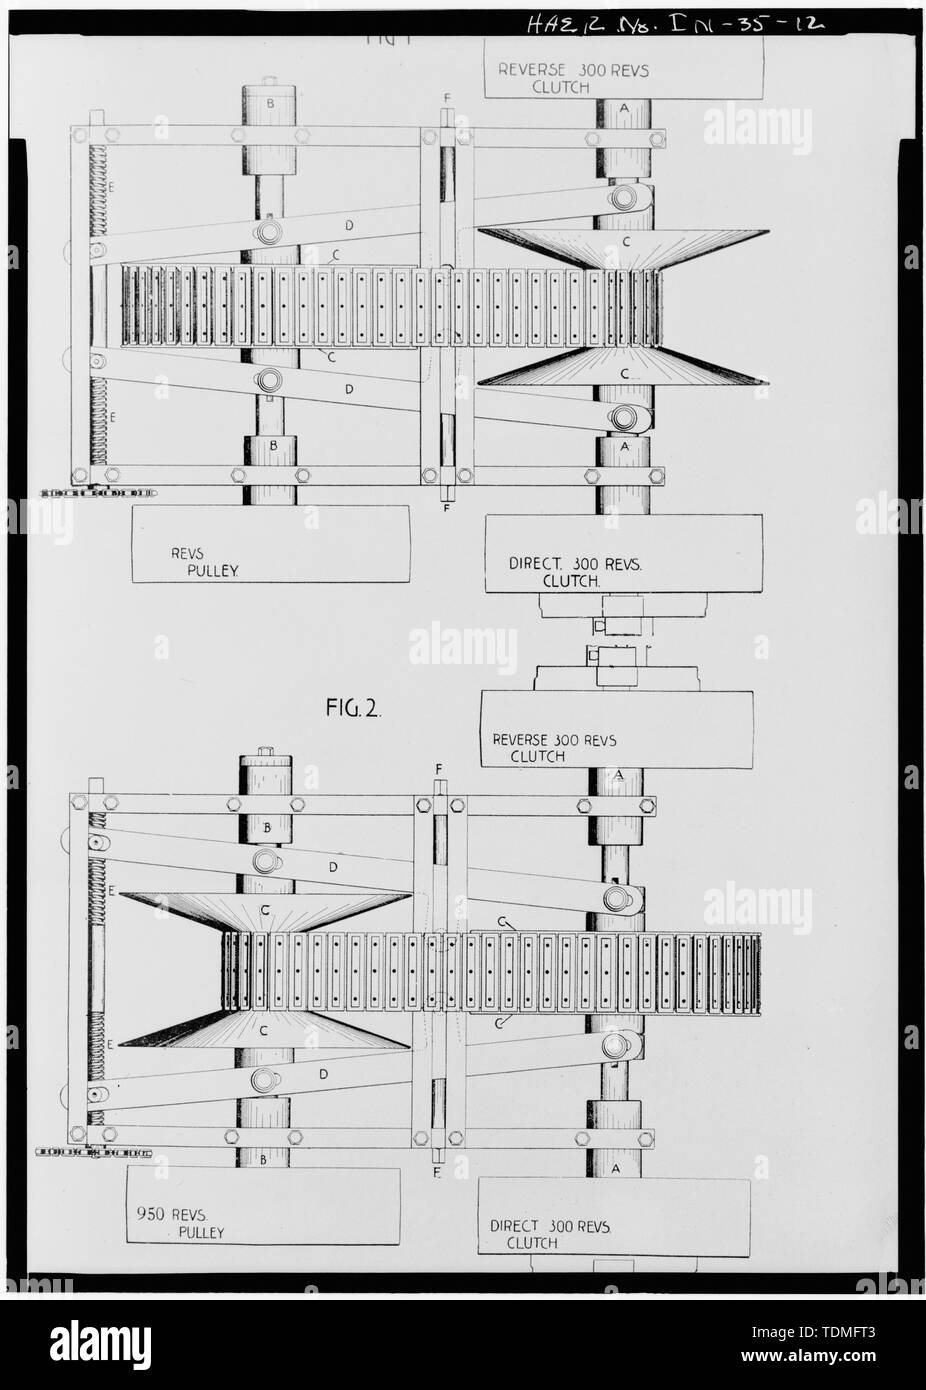 PHOTOCOPY OF DRAWINGS OF THE REEVES PULLEY AND CLUTCH POWER TRANSMISSION SYSTEM - Buckeye Manufacturing Company, Columbia Avenue, Anderson, Madison County, IN; Lambert Brothers Manufacturing Company; Lambert, John William; Boucher, Jack E; Sackheim, Donald; Rosenberg, Robert Stock Photo